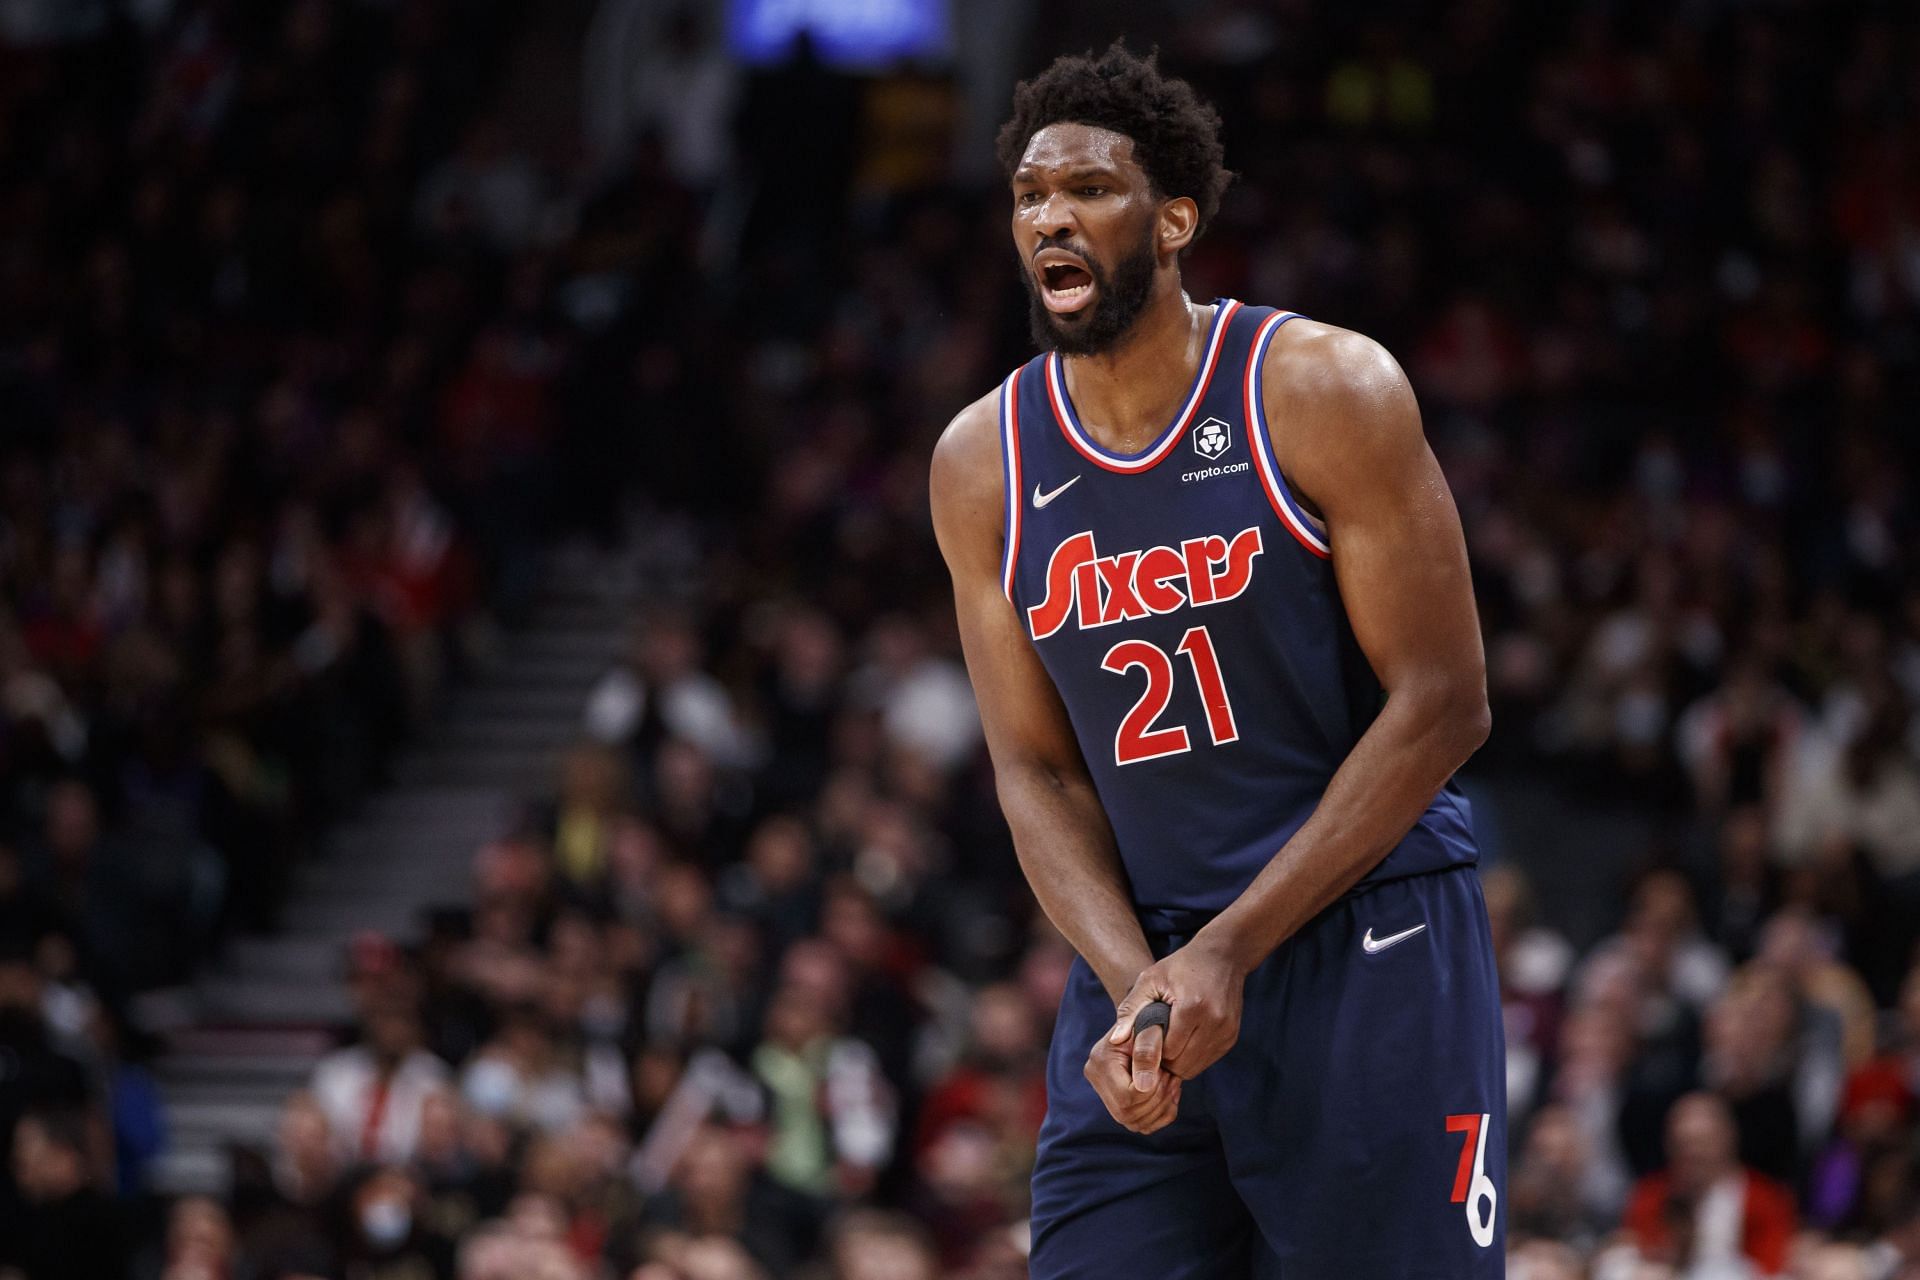 Joel Embiid scored 33 points with an injured thumb in Game 3.